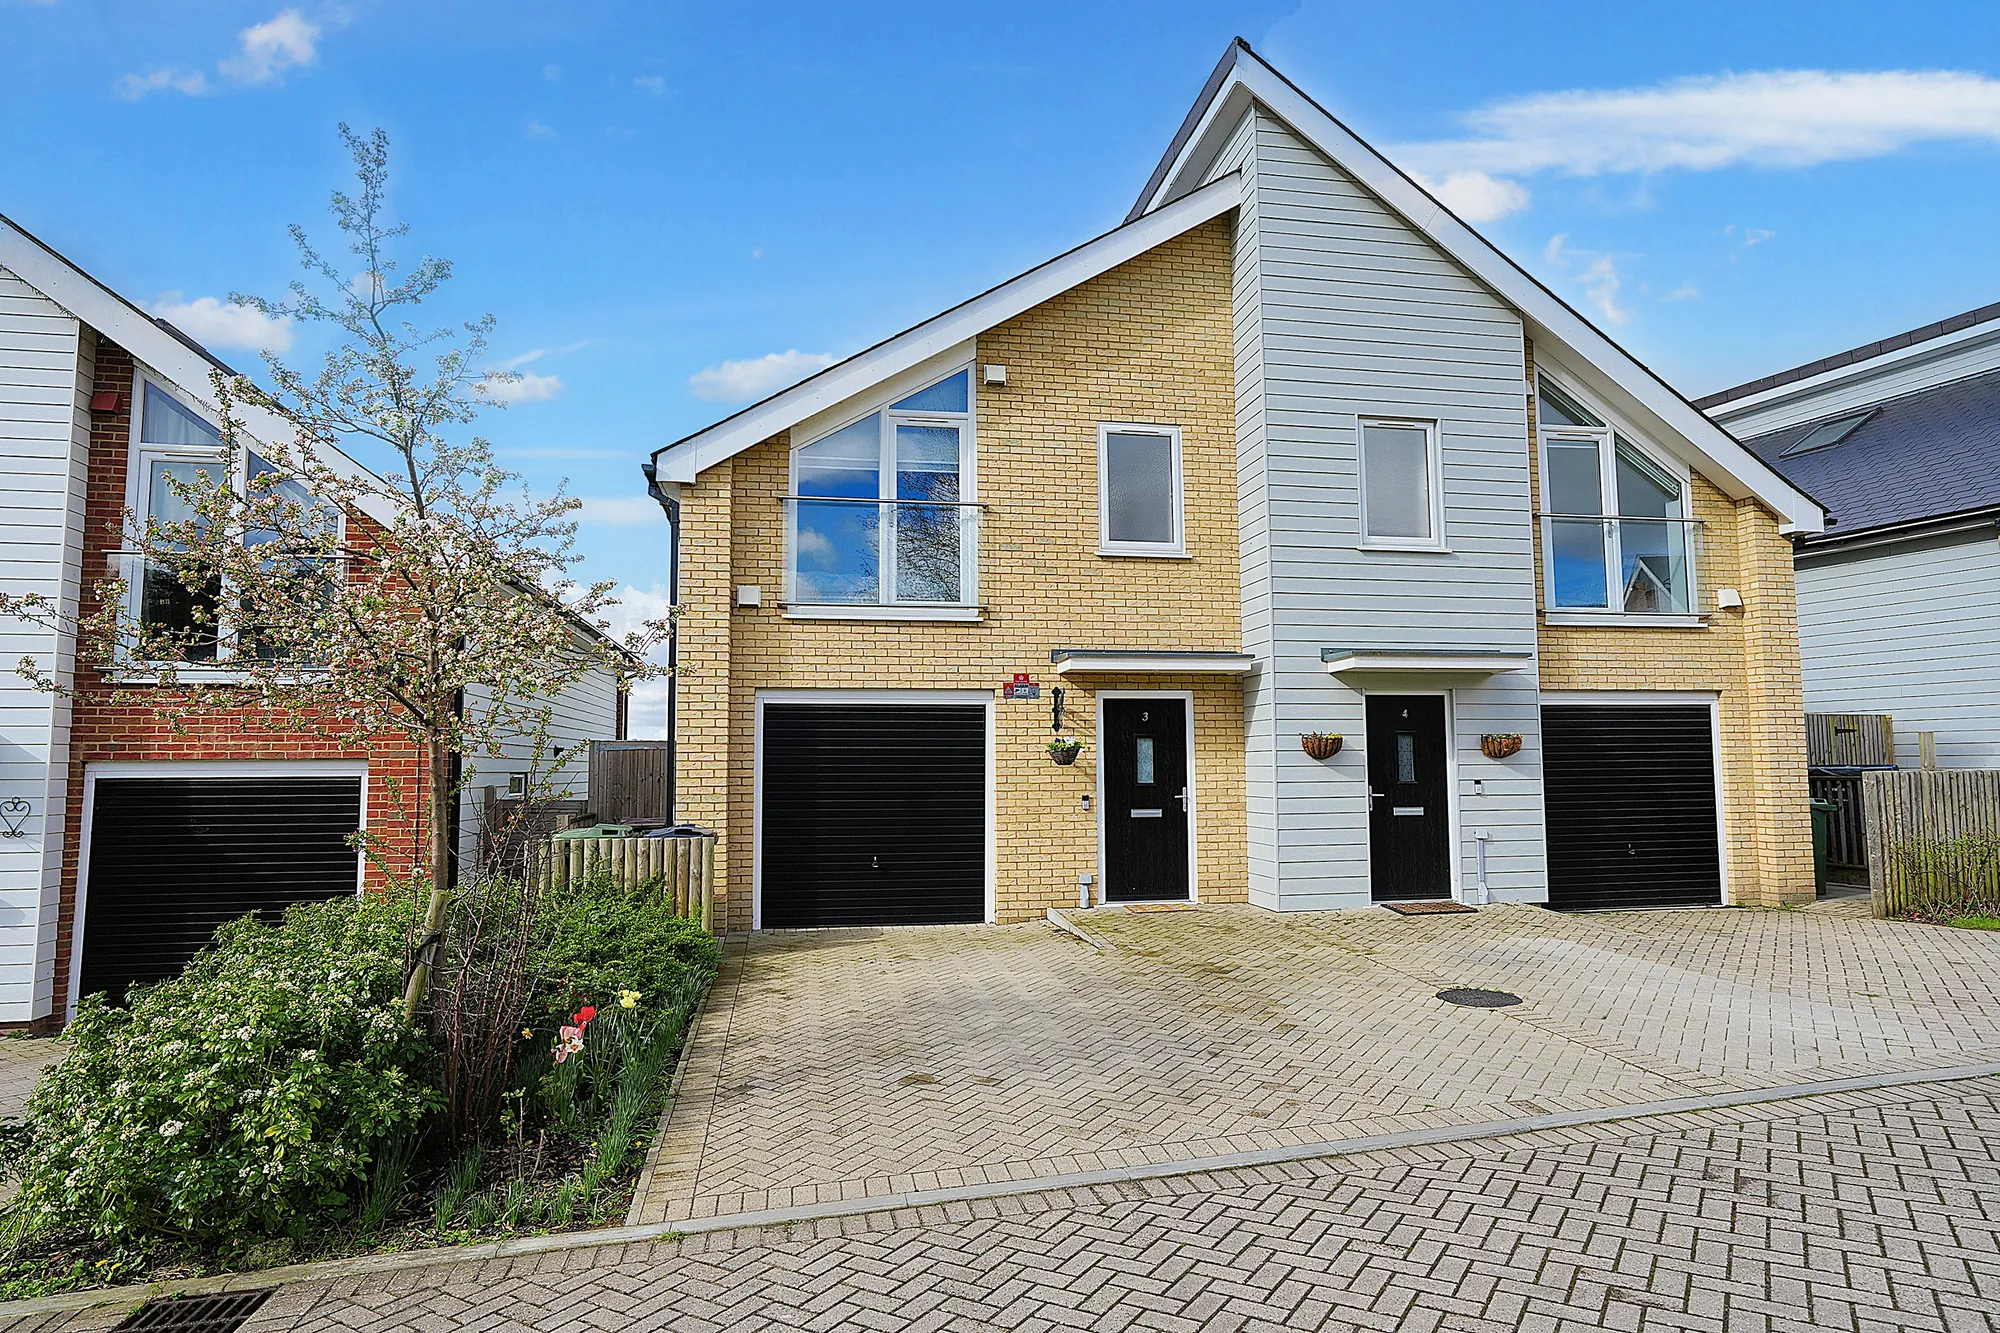 3 bed semi-detached house for sale in Castle View, Maidstone - Property Image 1